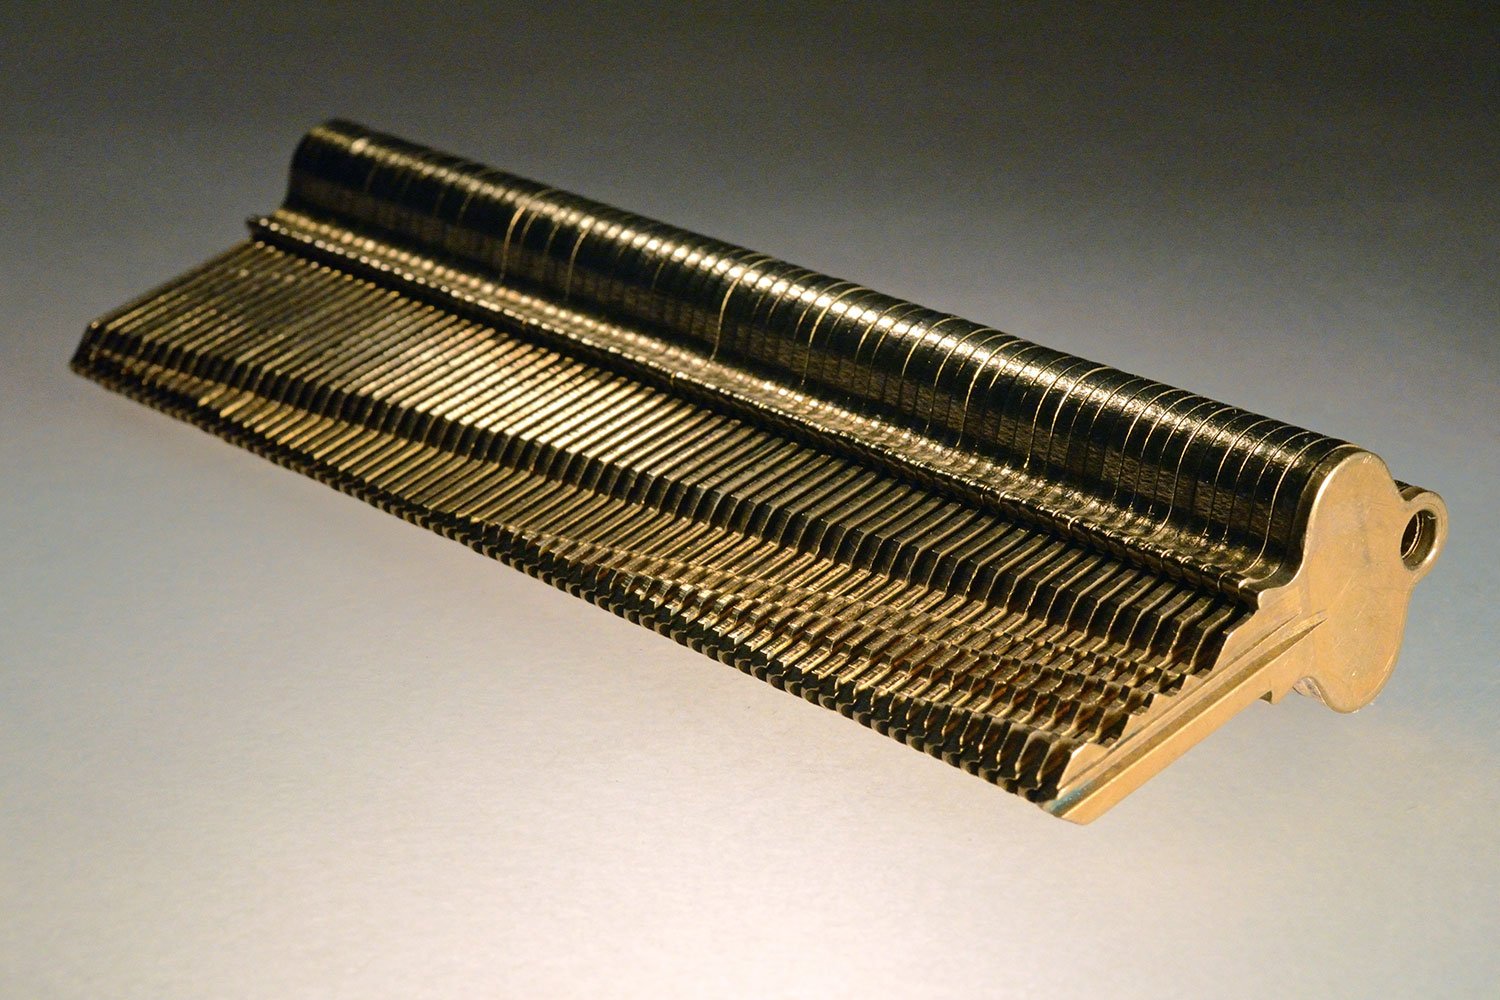   The Visual Topography of a Generation Gap (Brooklyn, NY, 1)  2011,     unique object, brass keys, 6 5/8 x 2 x 7/8 inches 